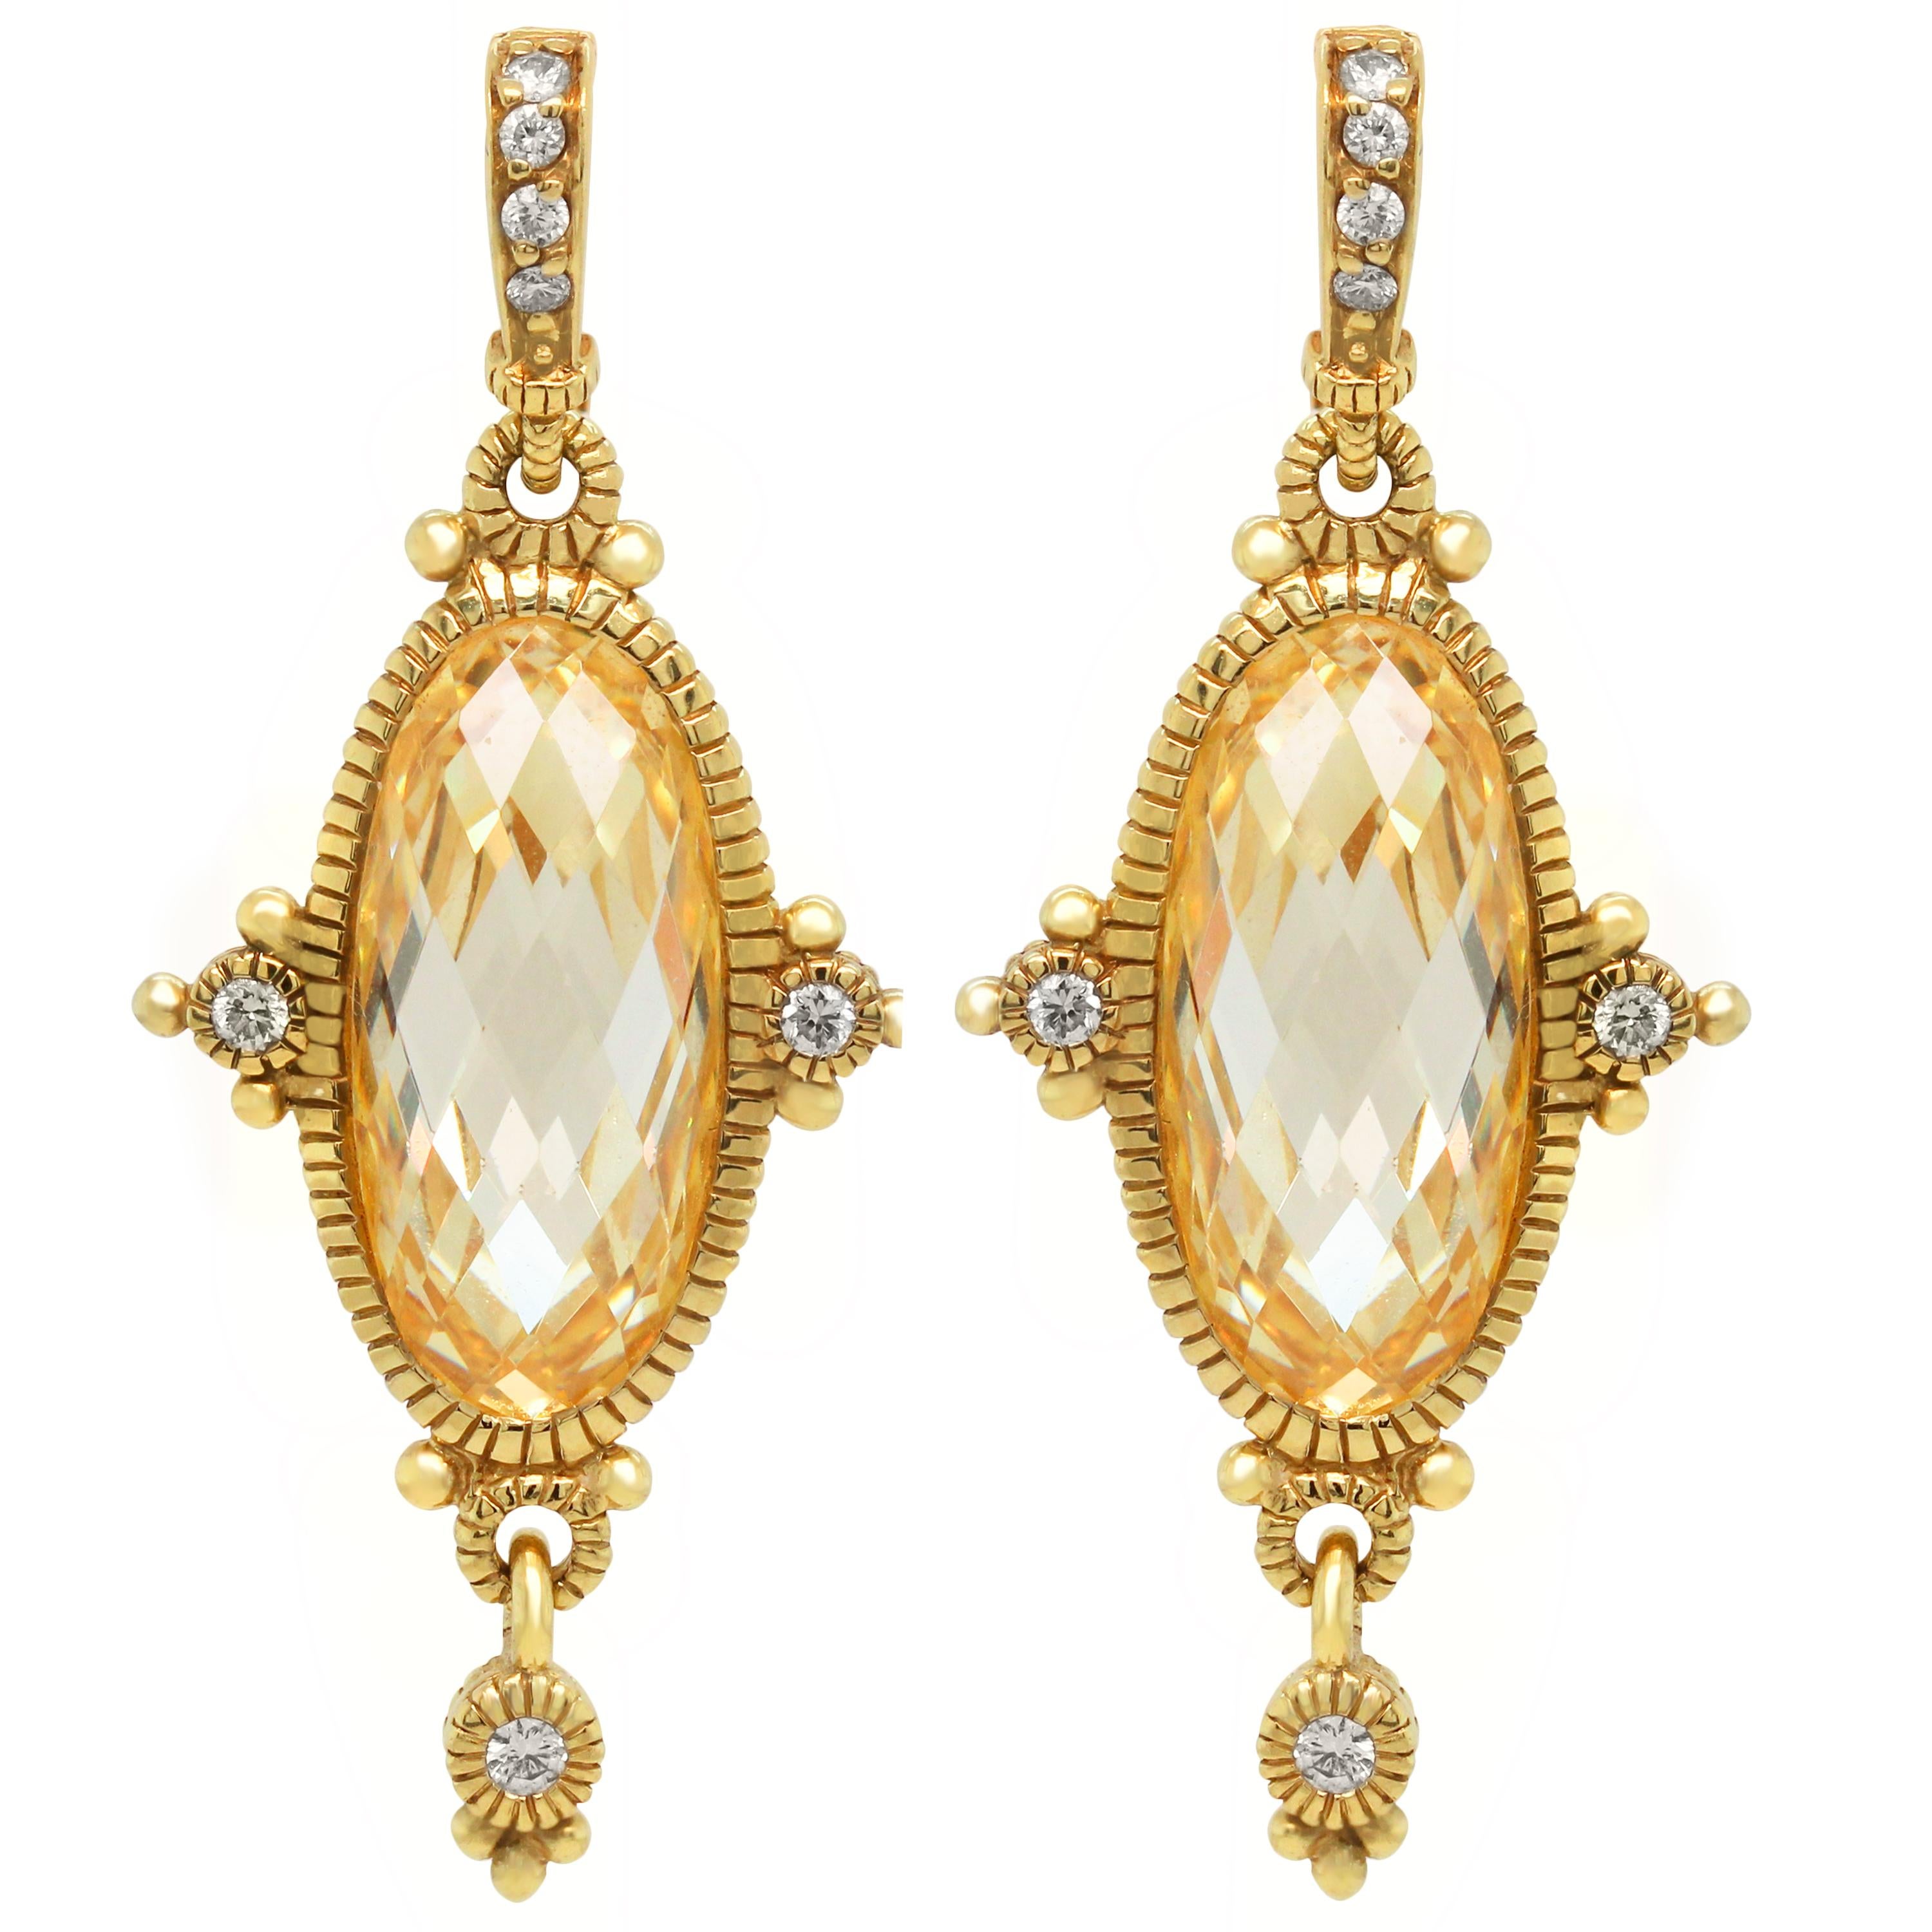 18K Gold Earrings by Judith Ripka with Citrine and Diamonds

14 diamonds make up pair. apprx. 0.28 ct. 

Signed JR in the clasp. 

1.5 inches length